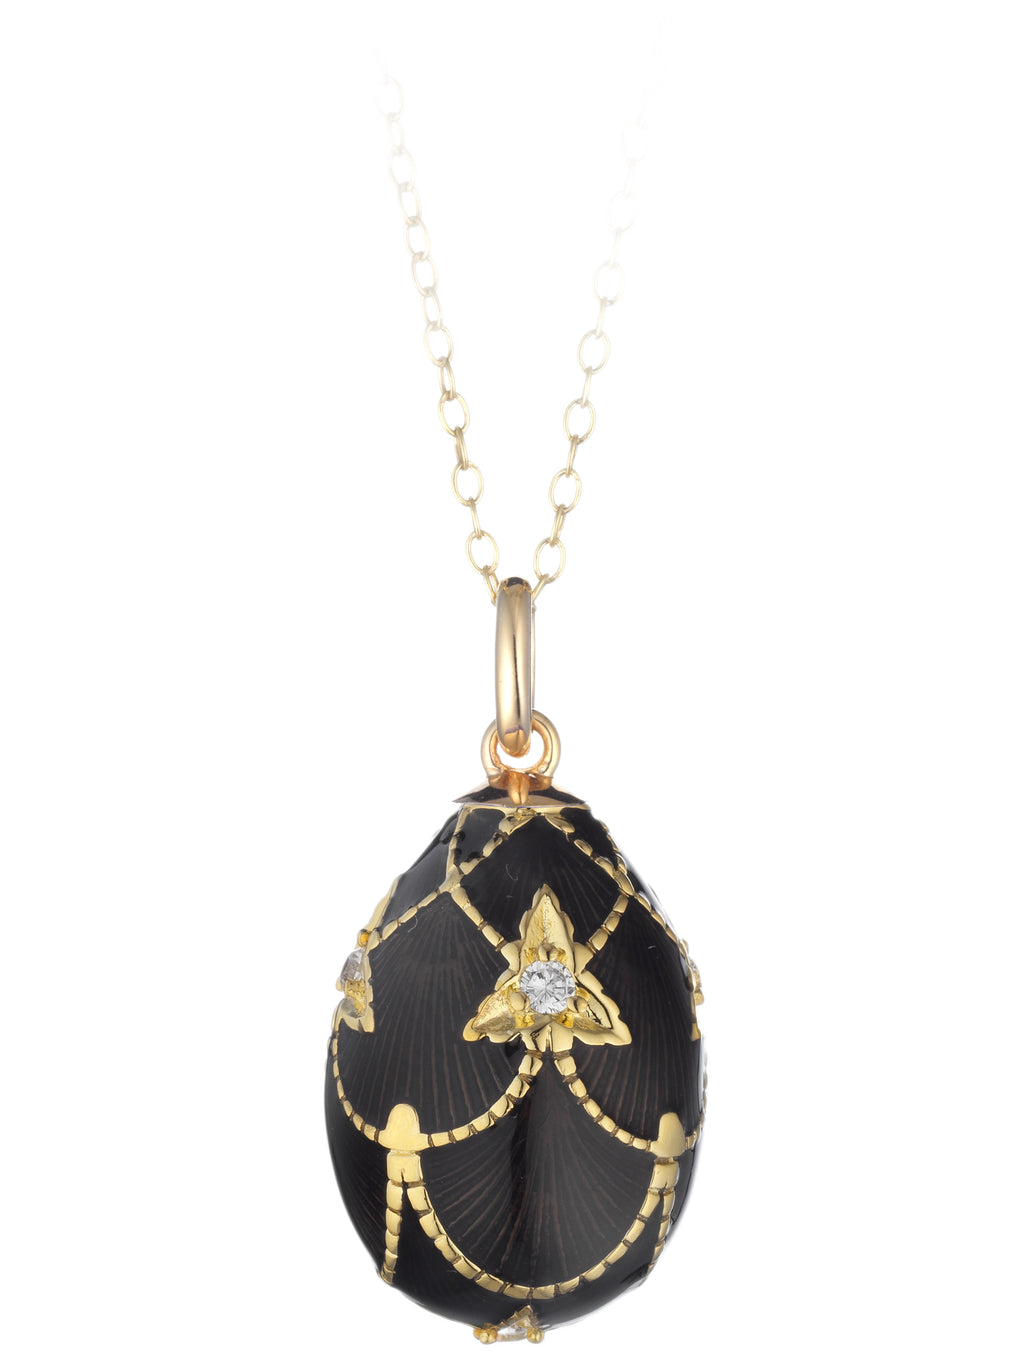 Peter Carl Chandelier Egg Pendant Necklace Tsars Collection by Tatiana Fabergé SA – Peter Carl Classics – Necklace